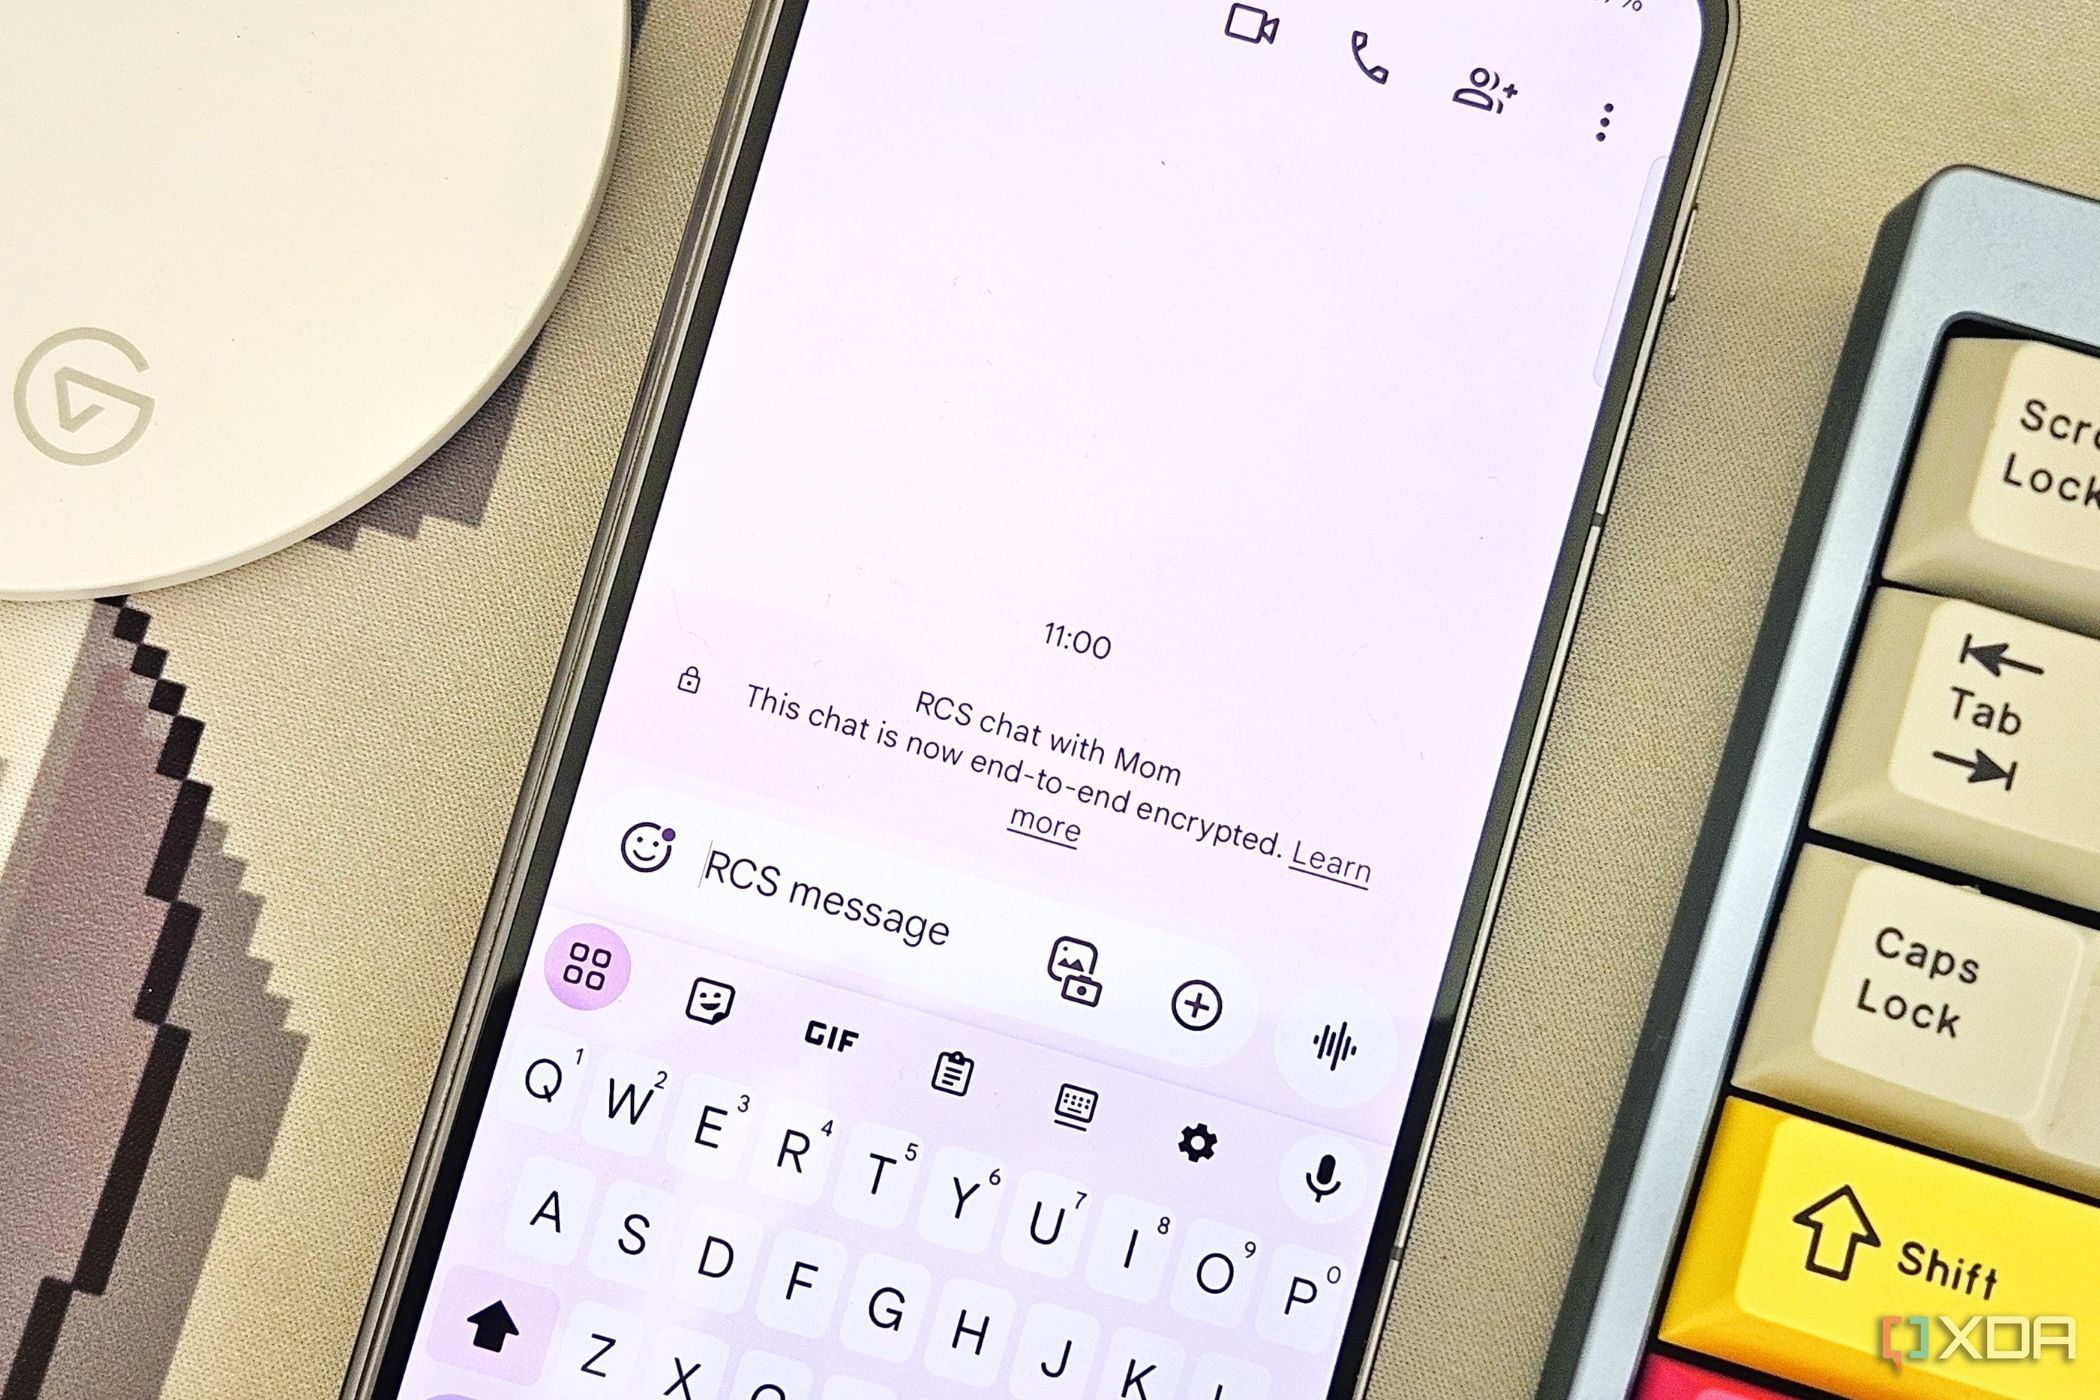 How to enable RCS messaging on Android devices